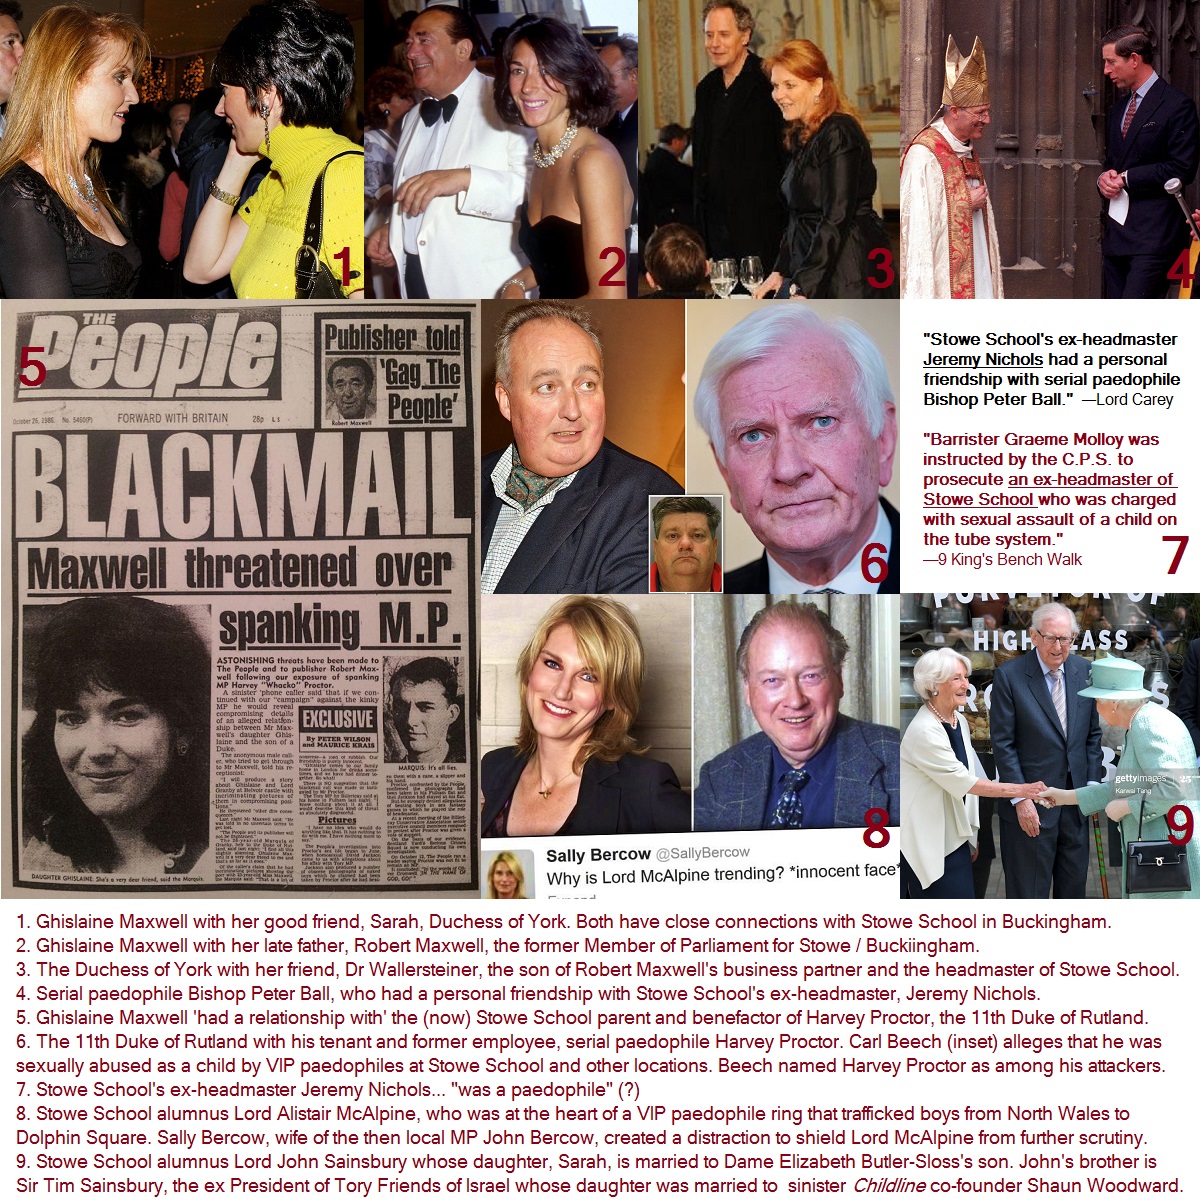 Also from the map, nearby  #StoweSchool is associated with:Ghislaine, Ghislaine's ex lover & FergiePrincipal Wallersteiner—son of Robert Maxwell's business partnerPedophile Bishop Peter Ball, 'a pedo ex-principal' & 'a pedophile ring'The late child trafficker Lord McAlpine